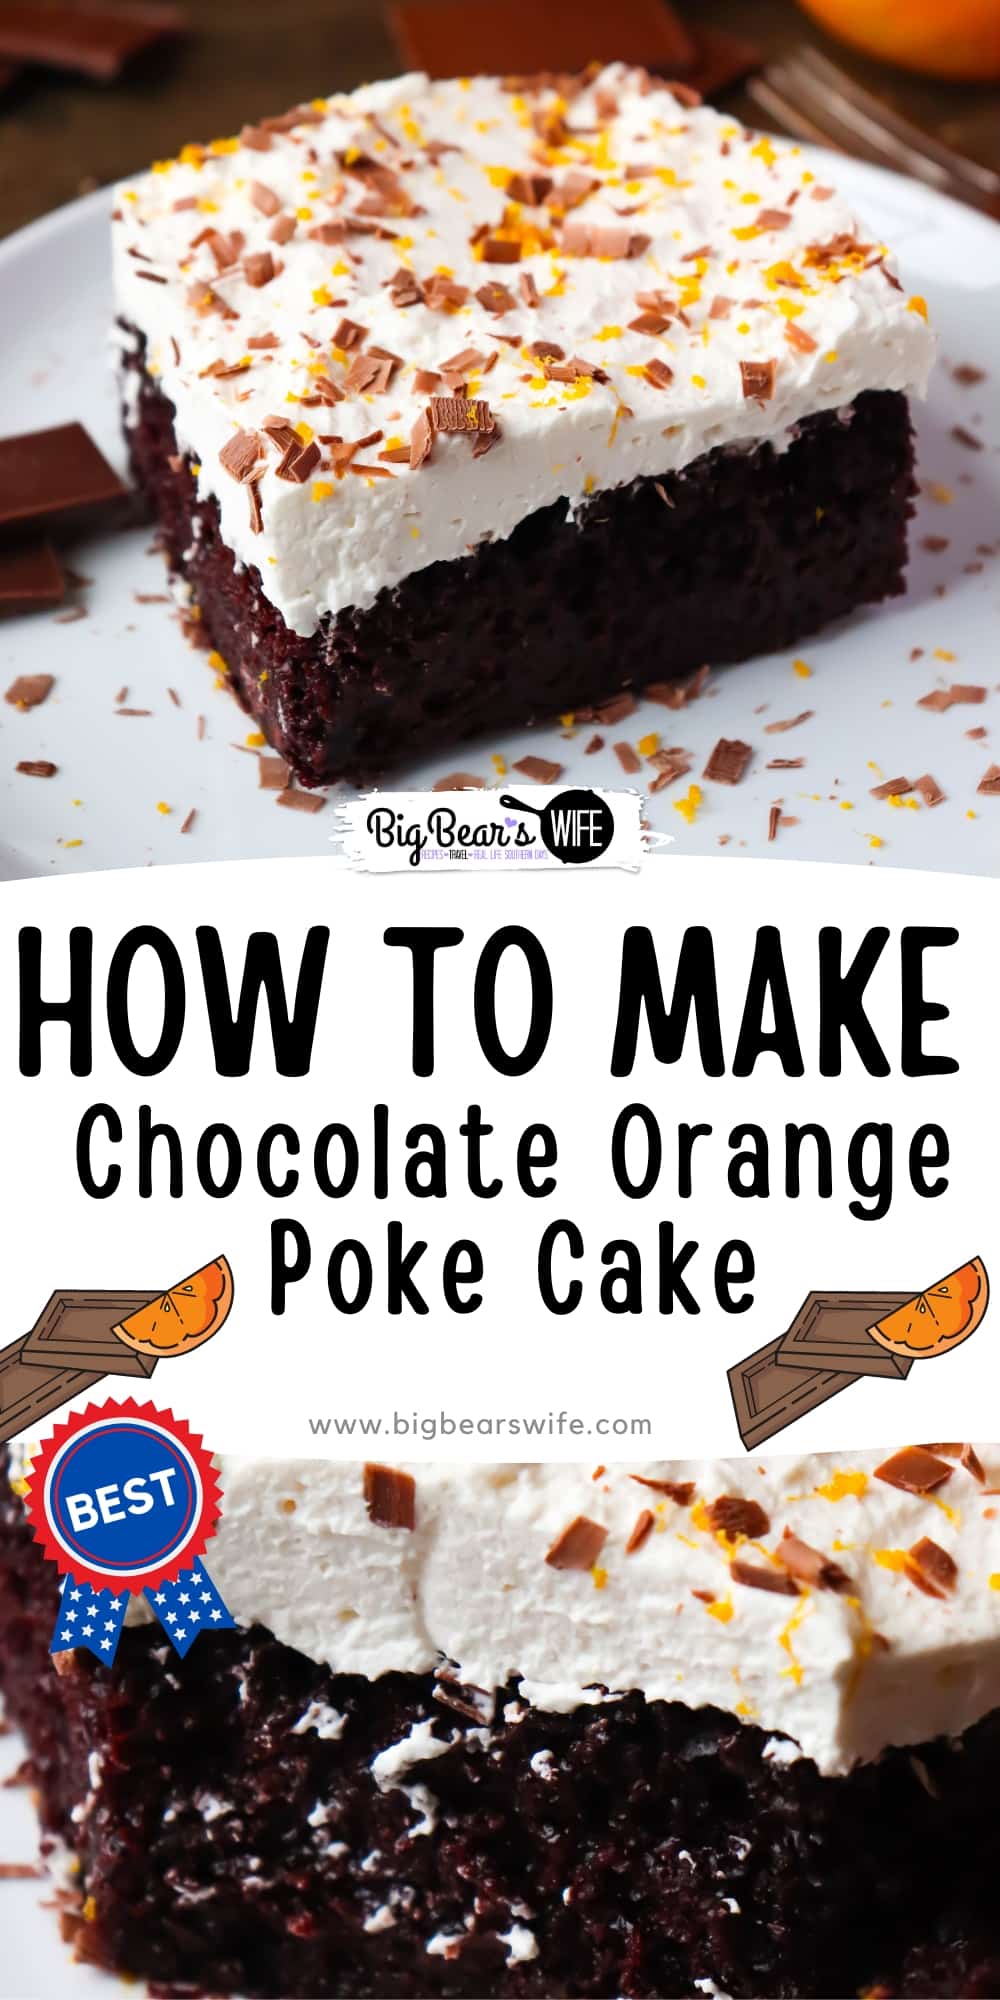 Skip the box, it doesn’t get any easier than this homemade Chocolate Orange Poke Cake. The combination of chocolate and orange is a match made in dessert heaven. Rich chocolate cake is drenched in orange gelatin for a super moist cake that's topped with orange zest-infused whipped cream. Almost a pudding cake, but with enough density to hold its structure.  via @bigbearswife